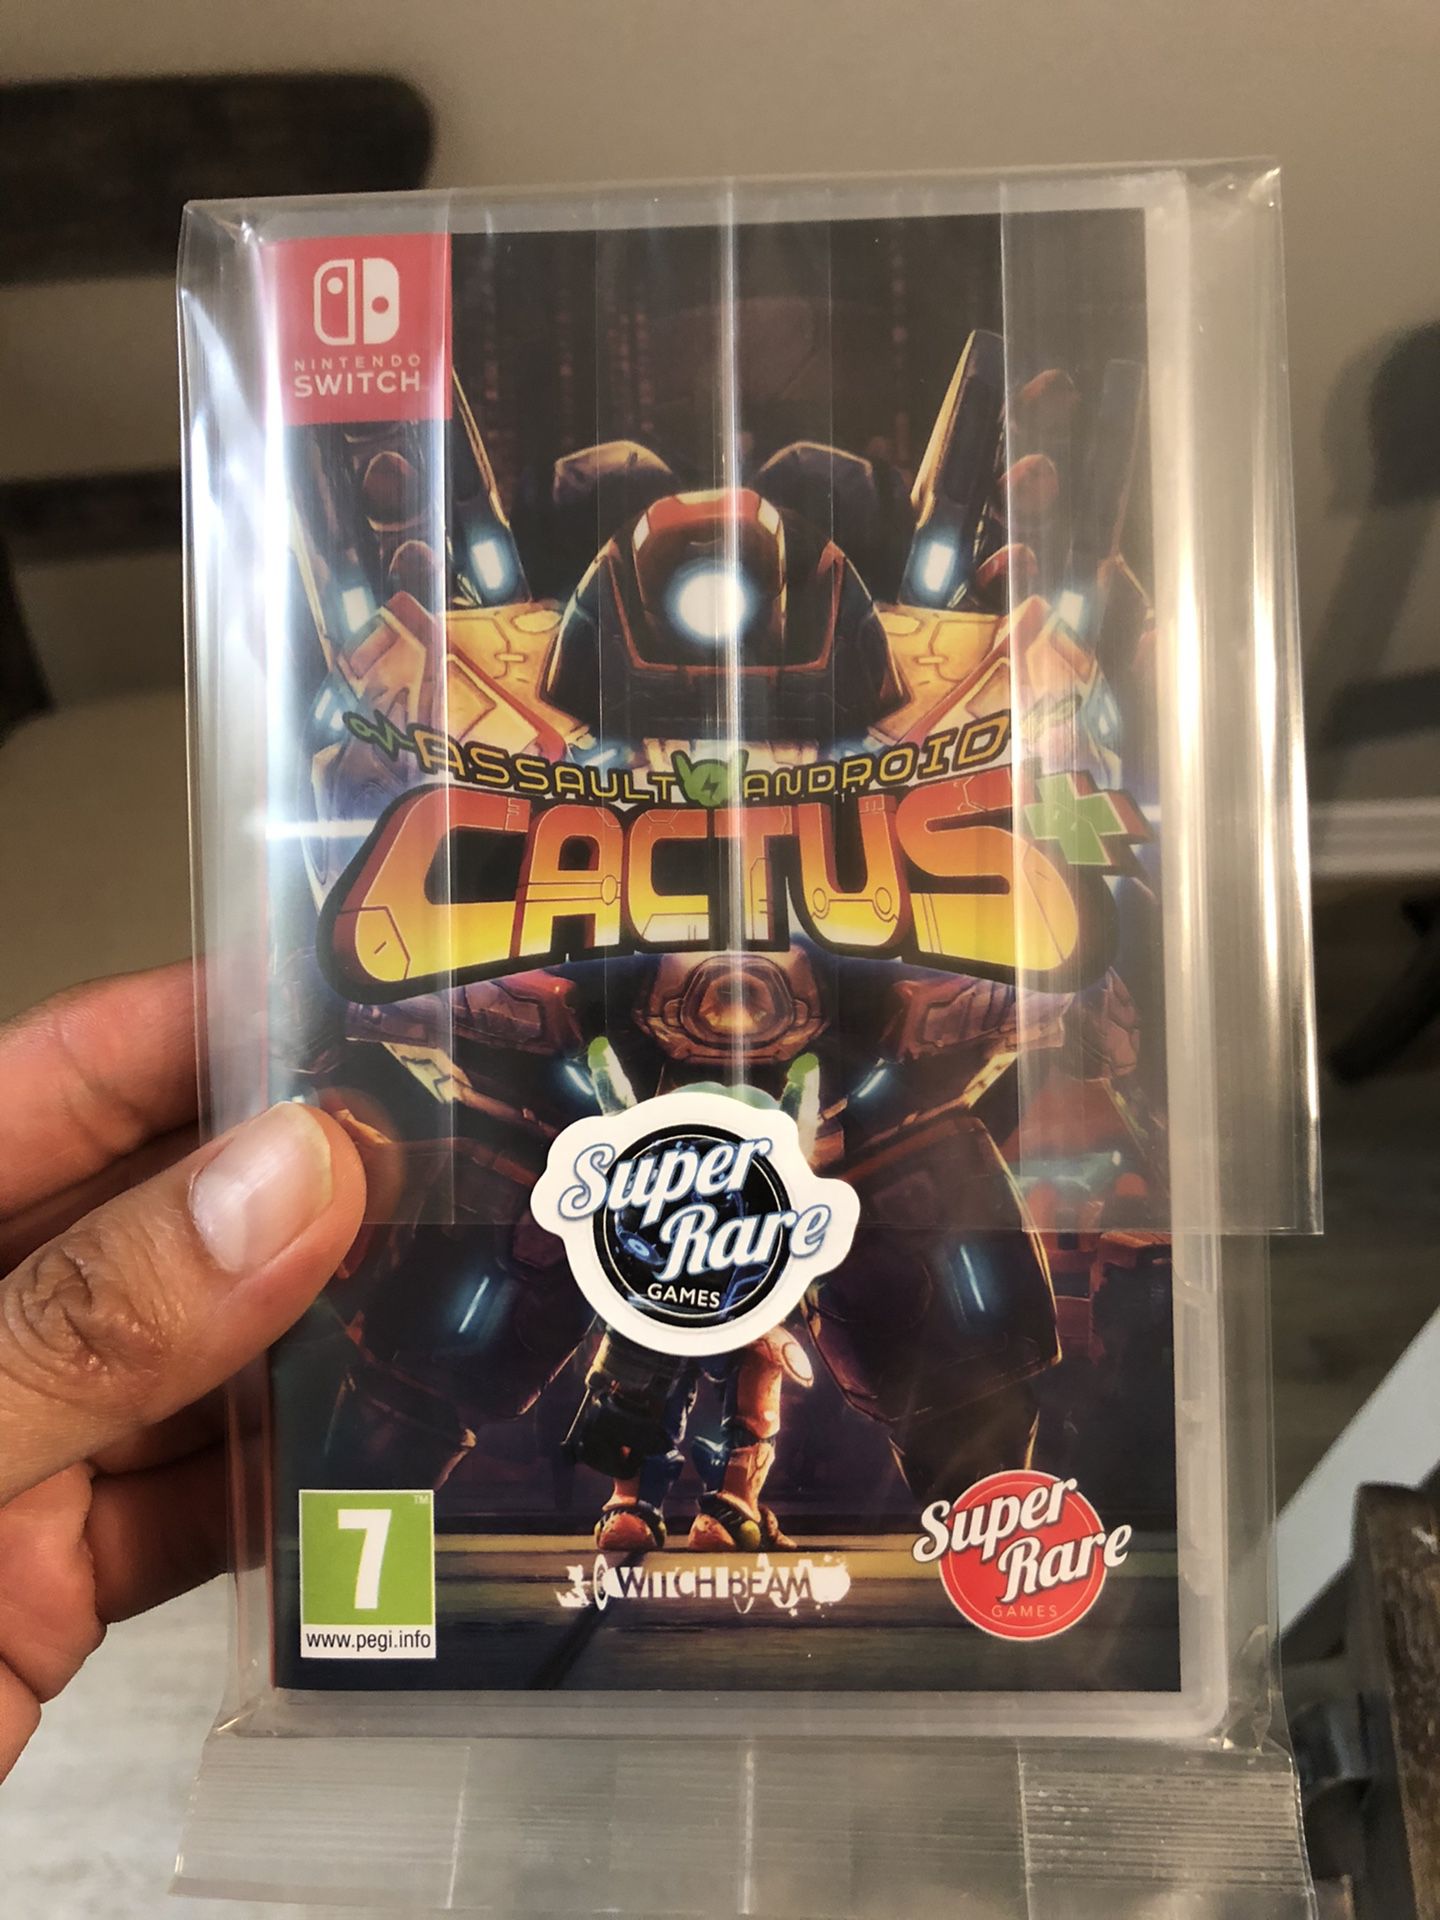 Assault Android Cactus+ for Nintendo Switch